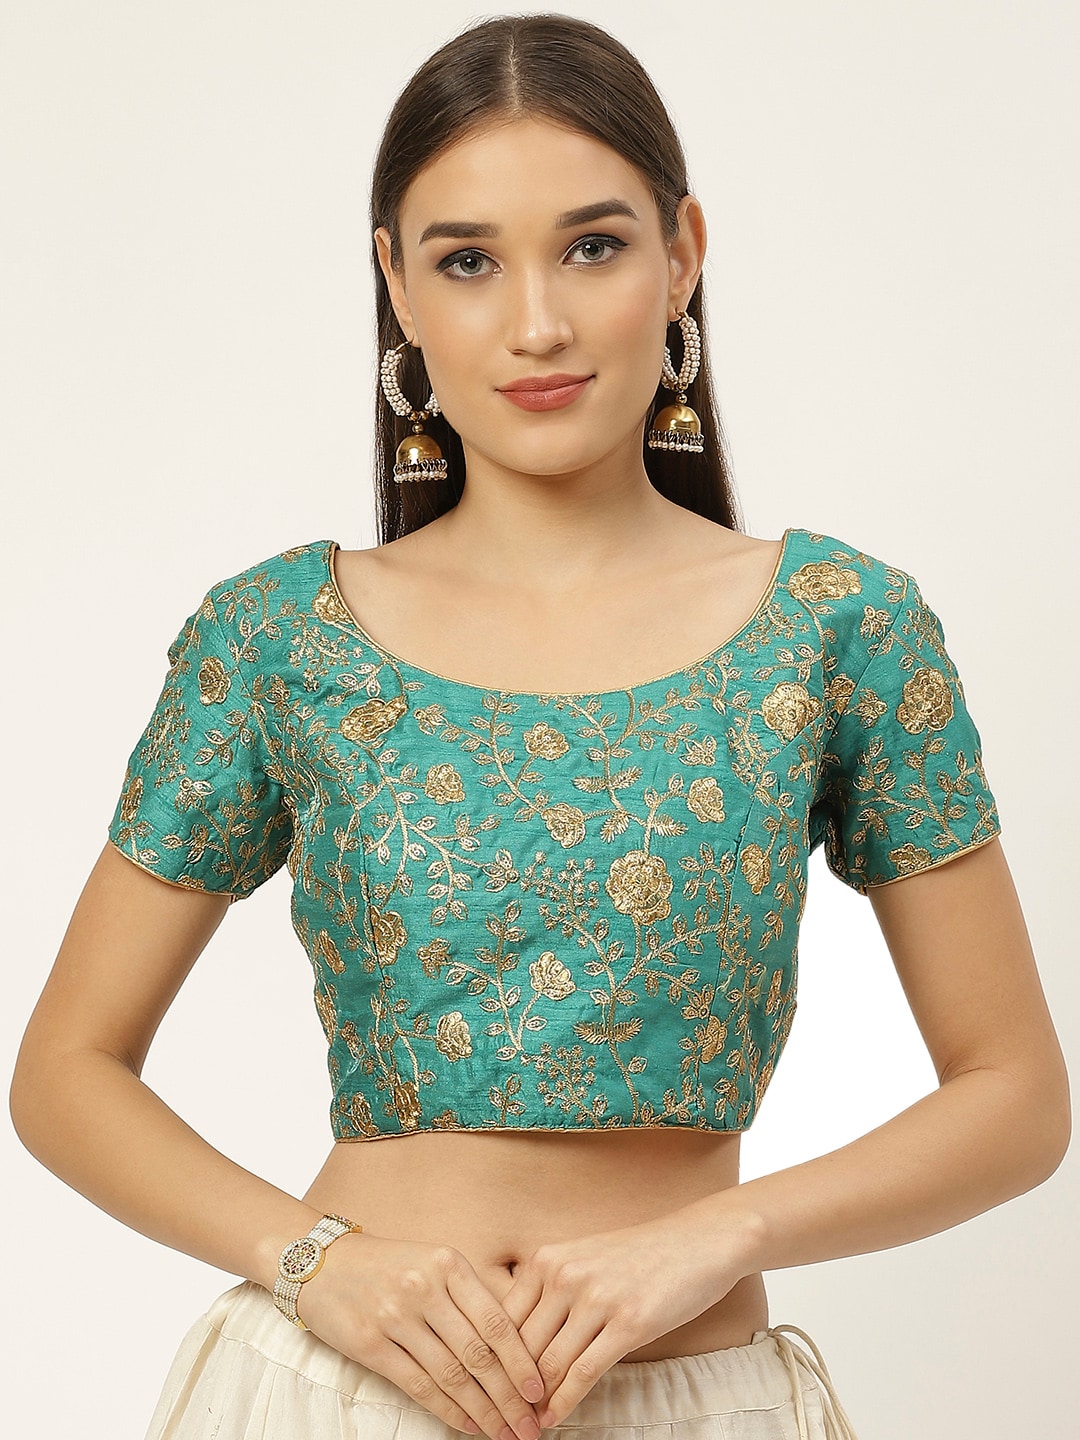 Studio Shringaar Women Turquoise Blue & Golden Embroidered Saree Blouse With Sequins Price in India